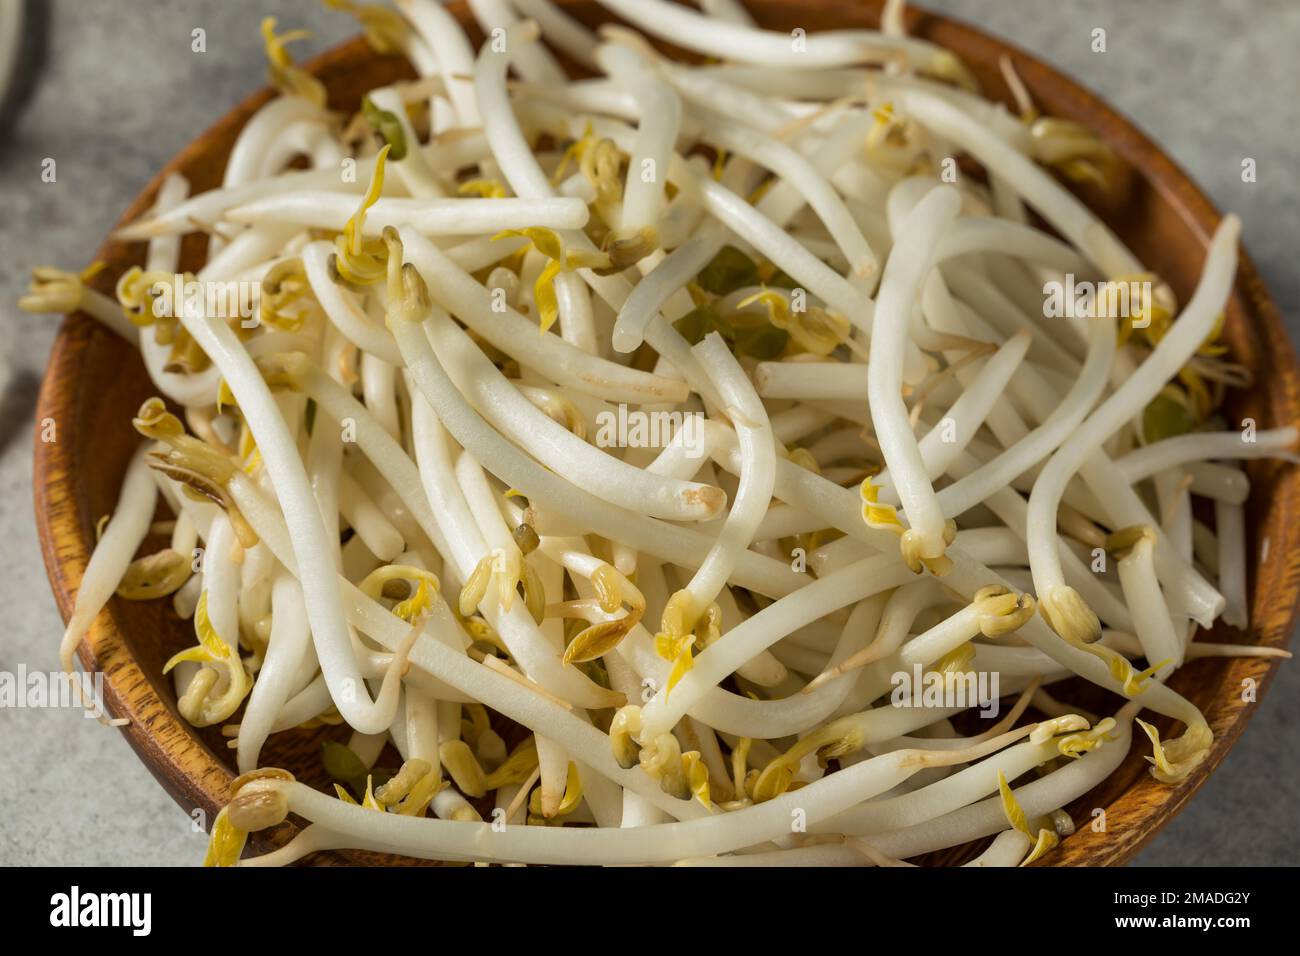 Raw White Organic Soy Bean Sprouts in a Bowl Stock Photo